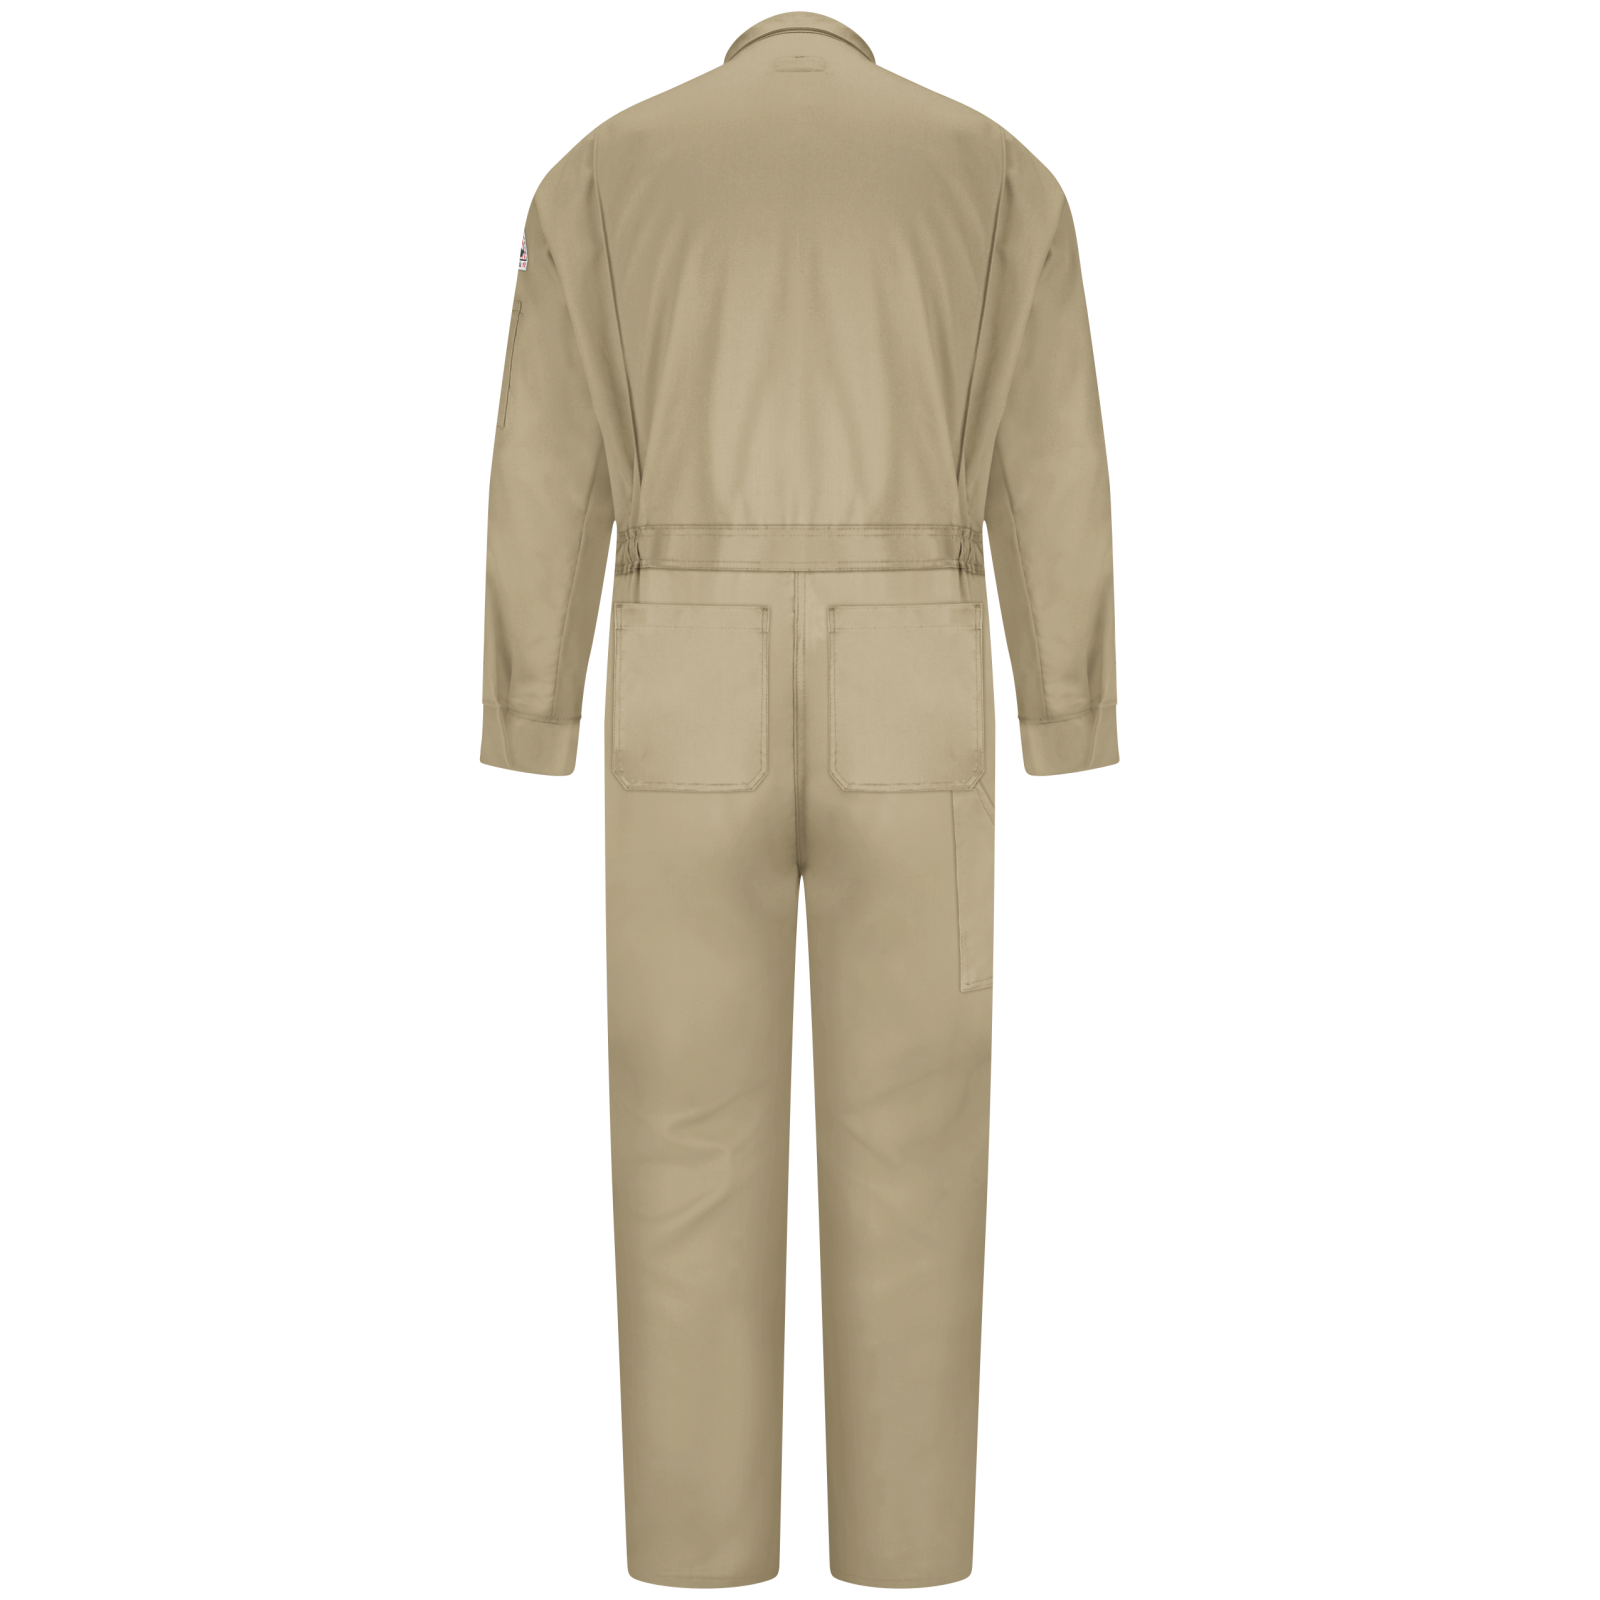 Bulwark Coverall Size Chart